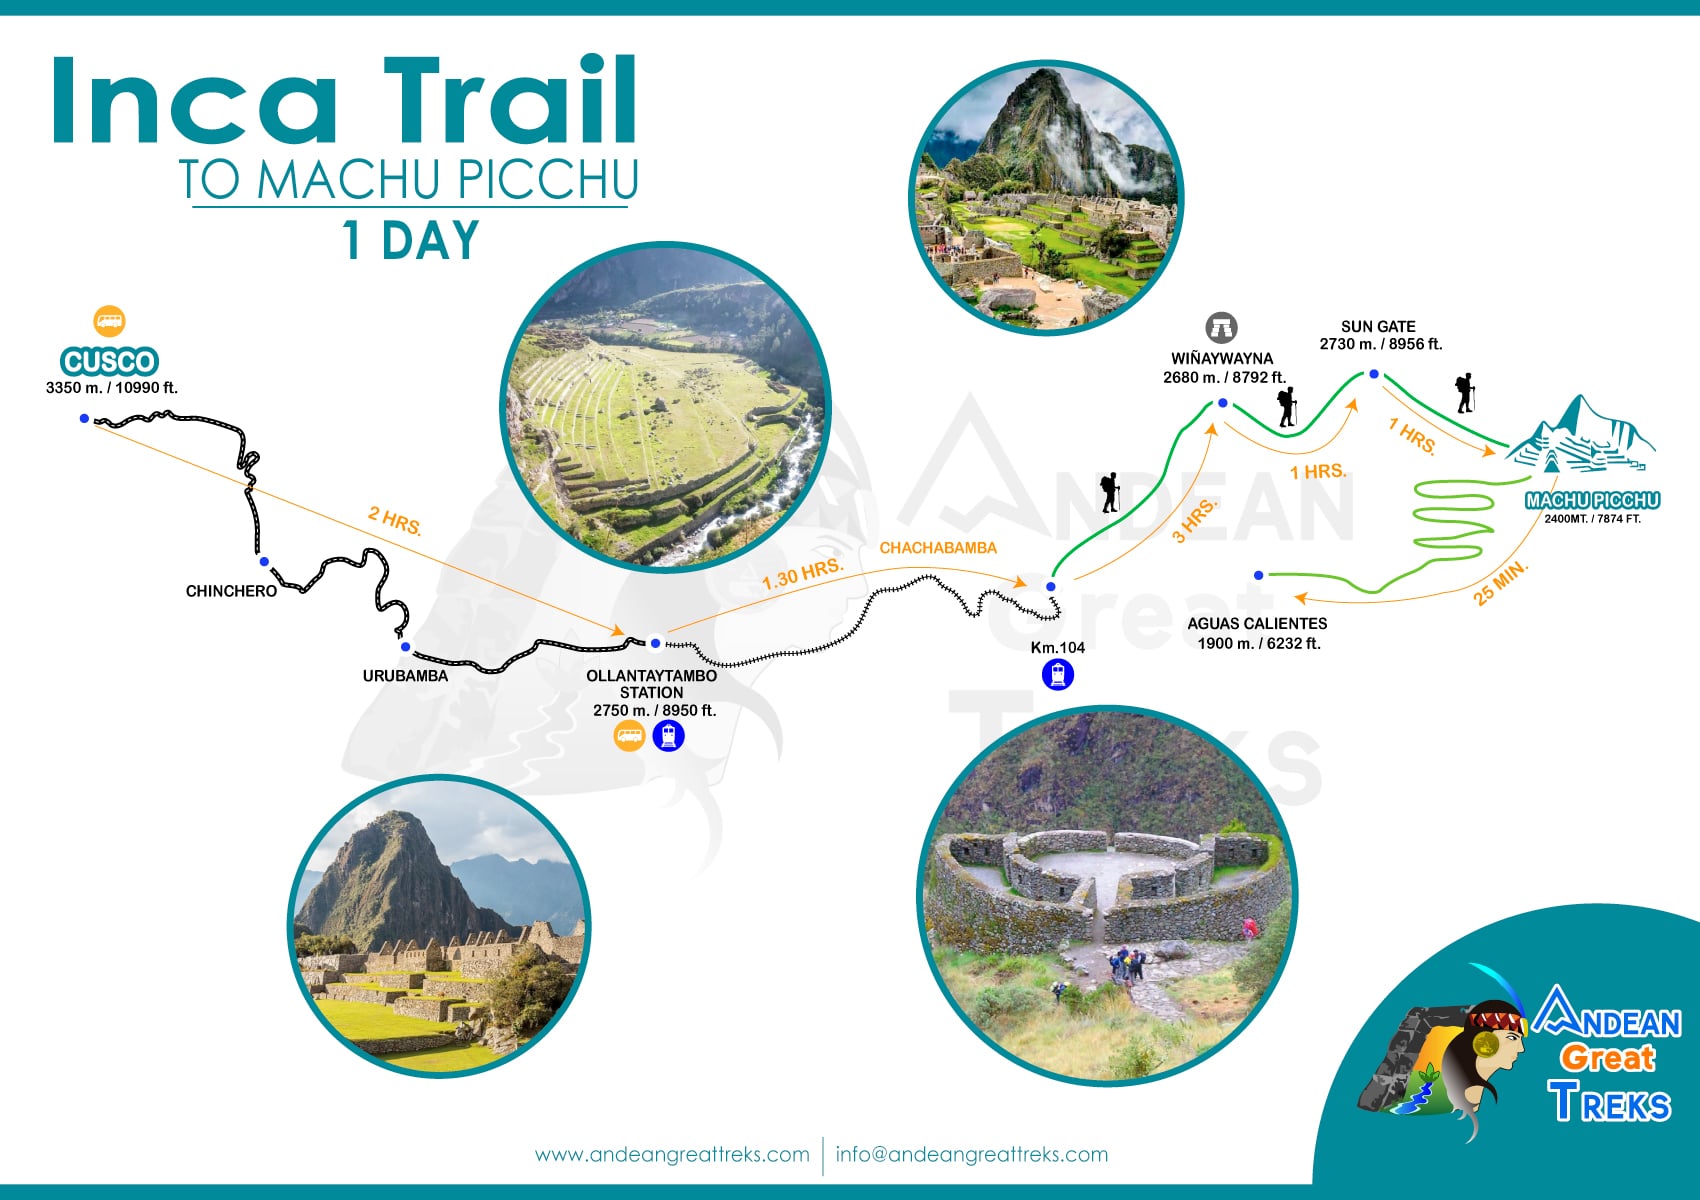 inca trail to machu picchu 1 day by andean great treks